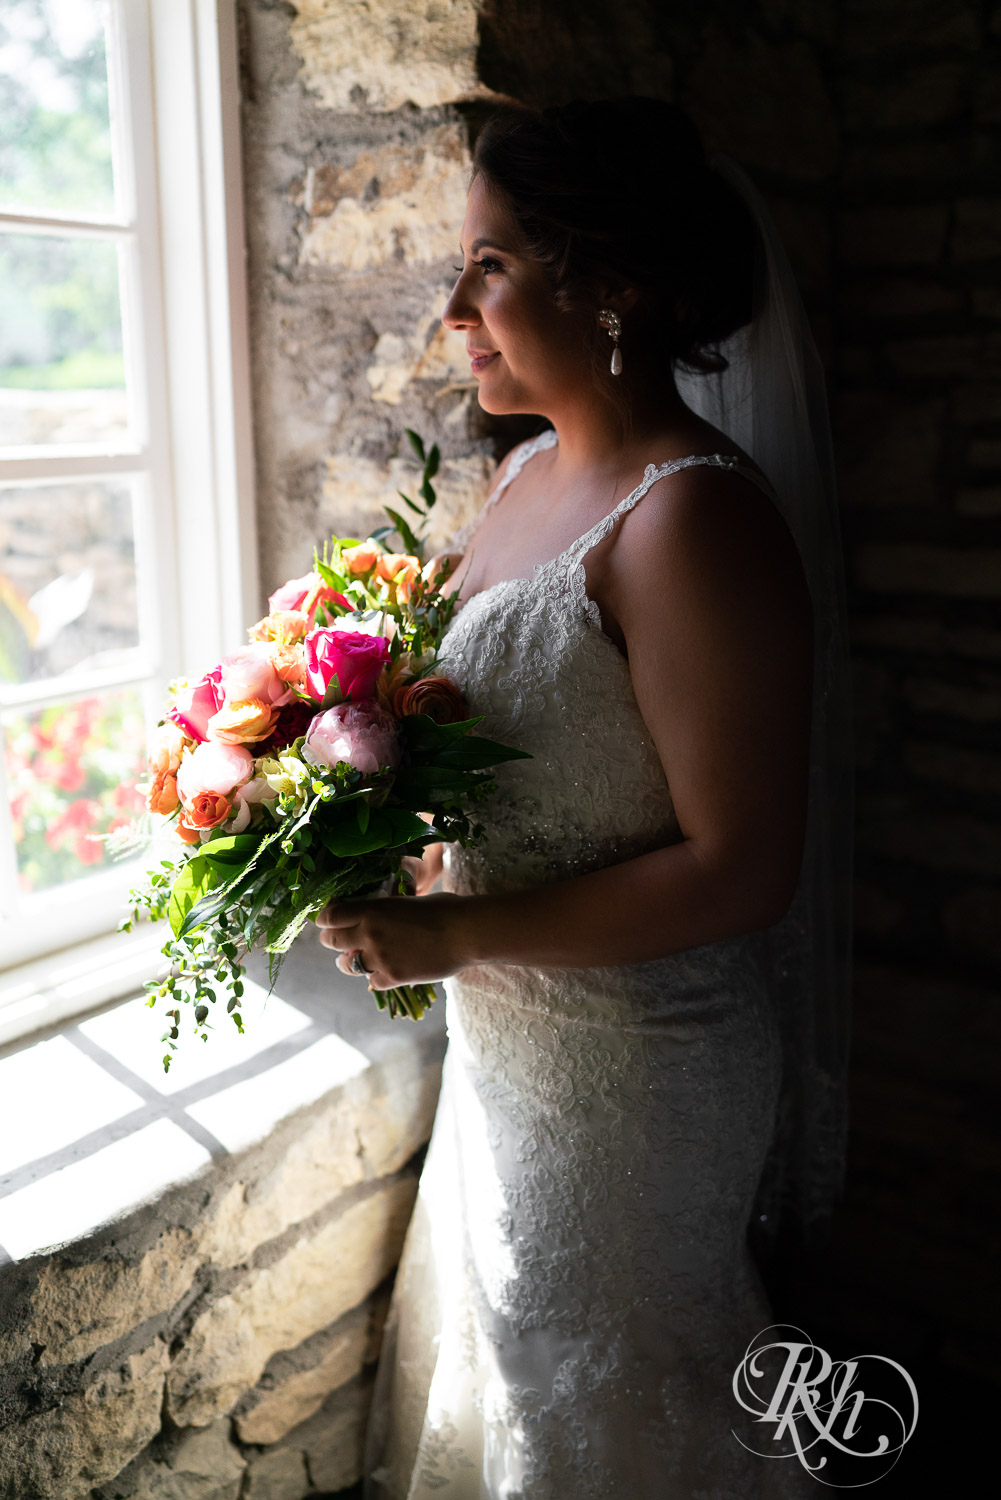 Bride holding flowers looking out the window at summer brunch wedding at Mayowood Stone Barn in Rochester, Minnesota.